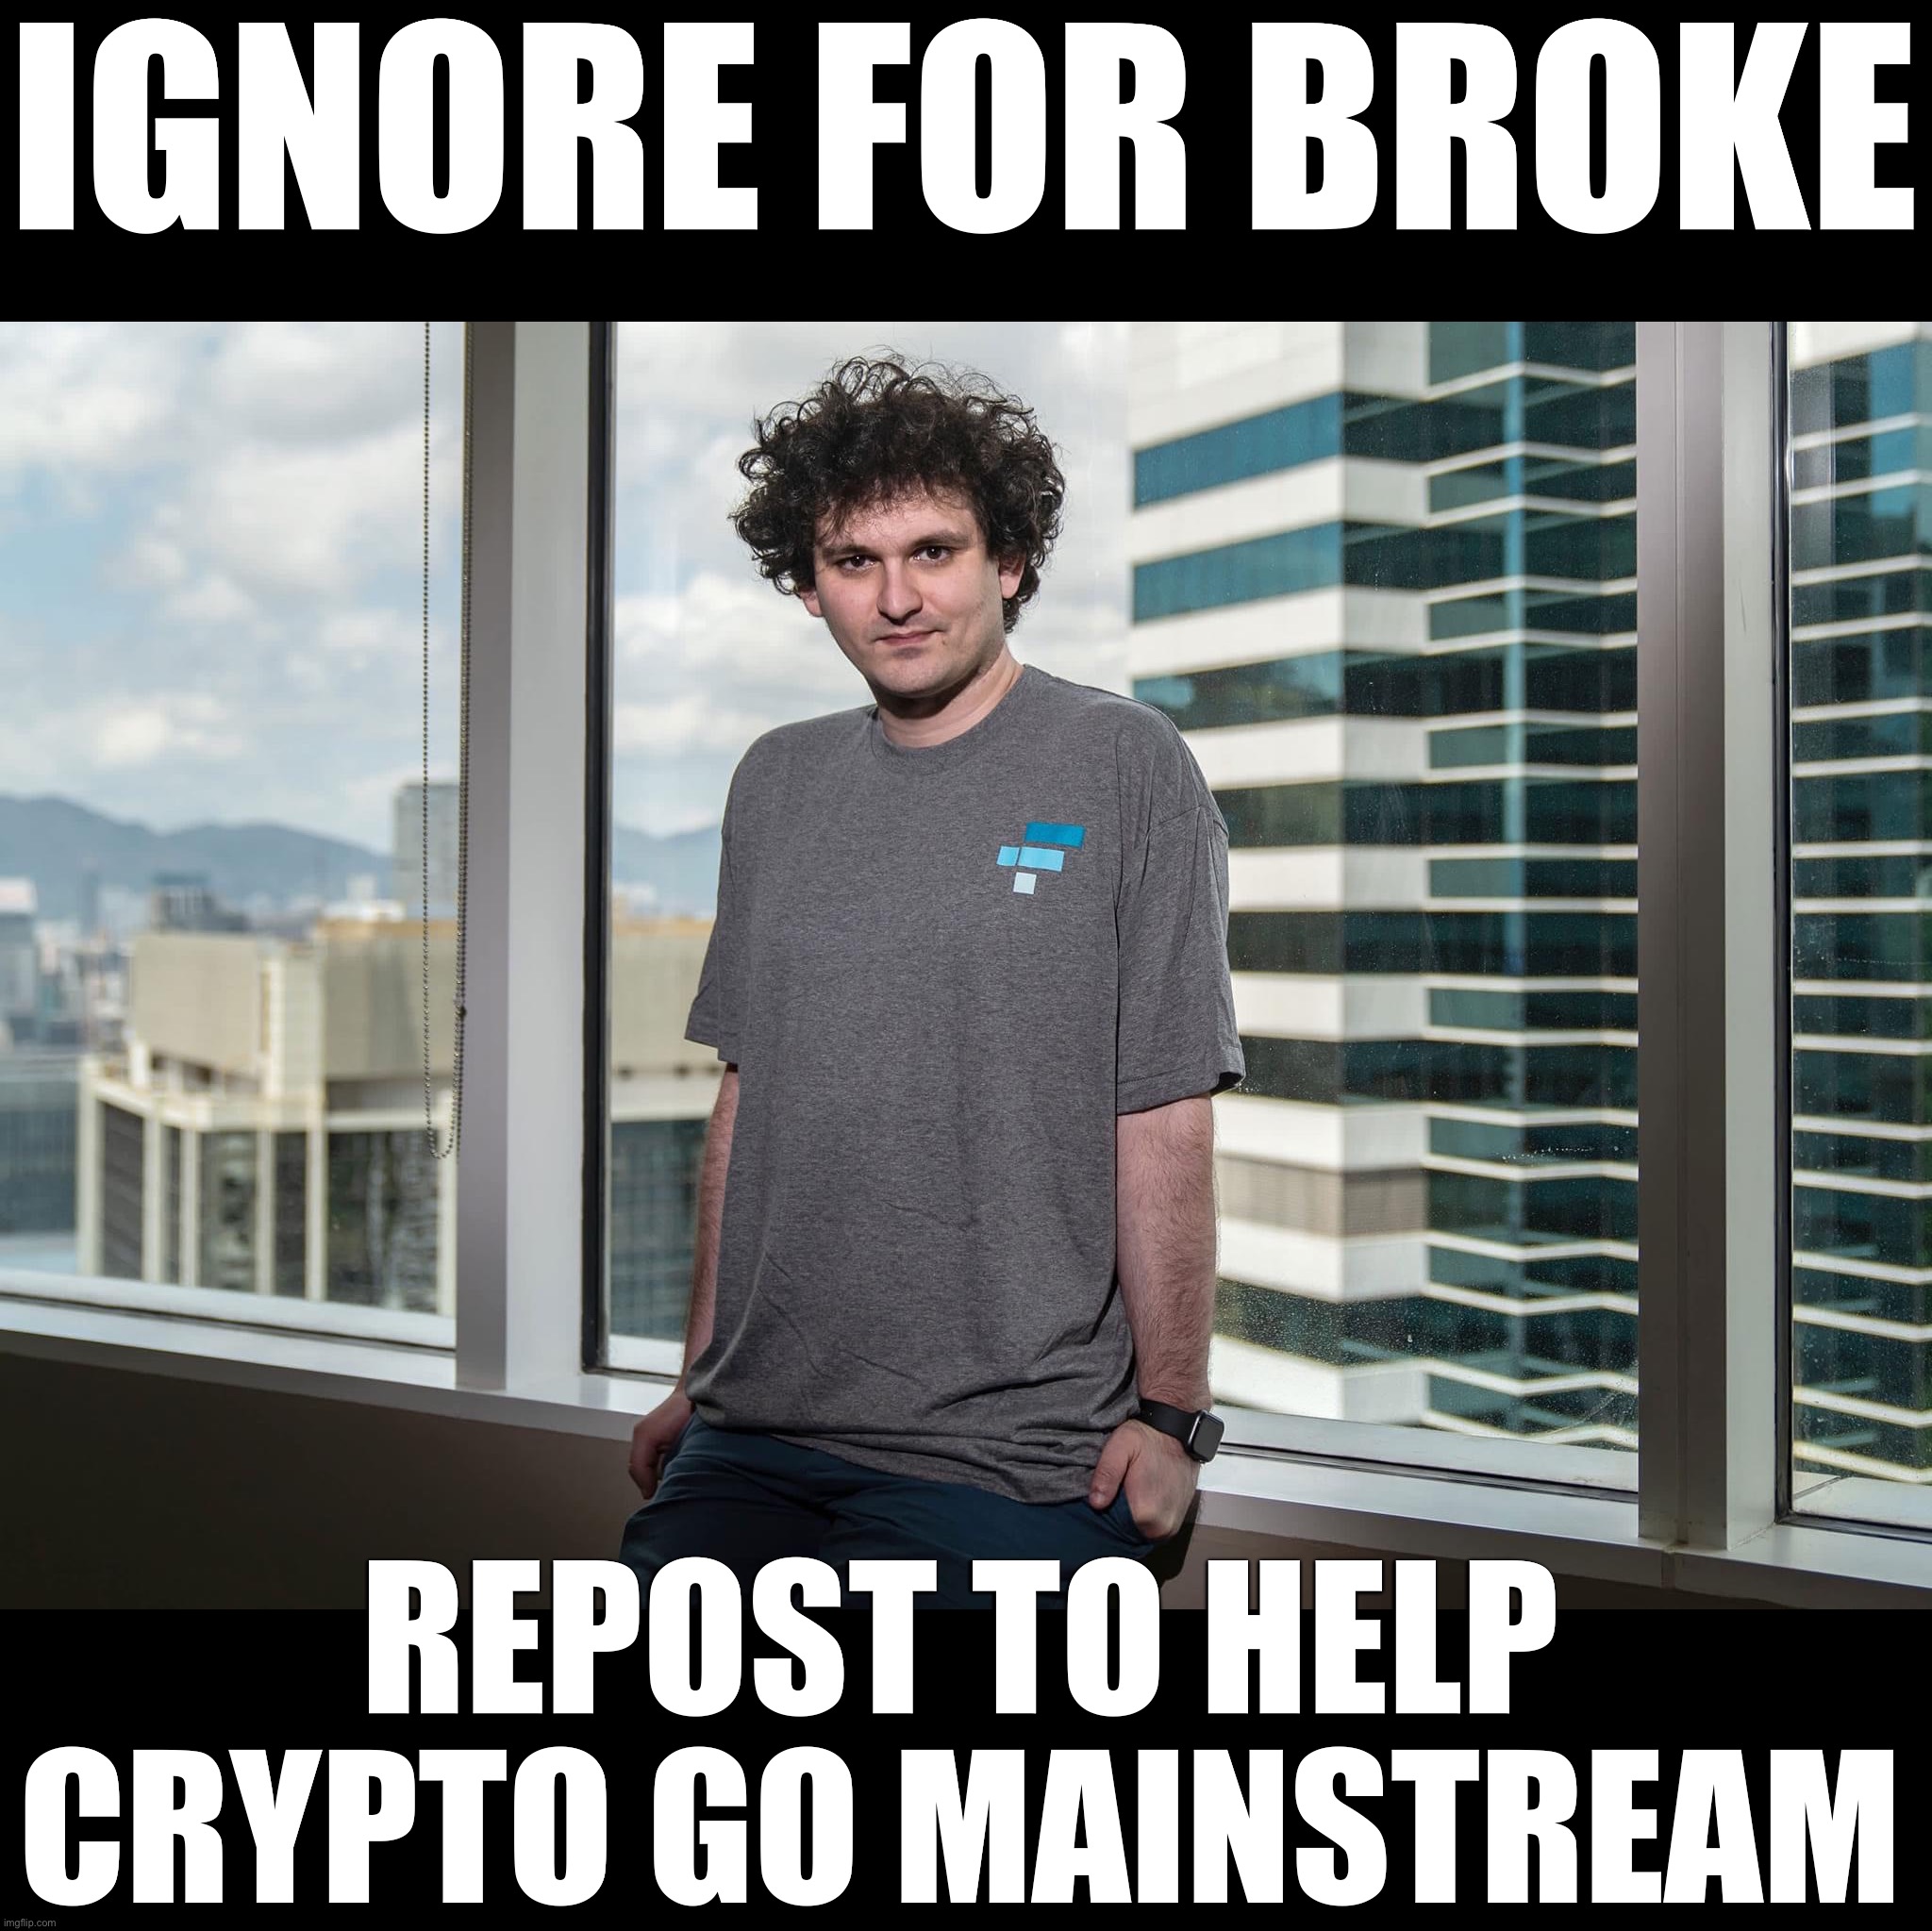 If you don’t repost this in 7 different streams then crypto will never be a meme. Help crypto be a meme | IGNORE FOR BROKE; REPOST TO HELP CRYPTO GO MAINSTREAM | image tagged in sam bankman-fried,crypto,cryptocurrency | made w/ Imgflip meme maker